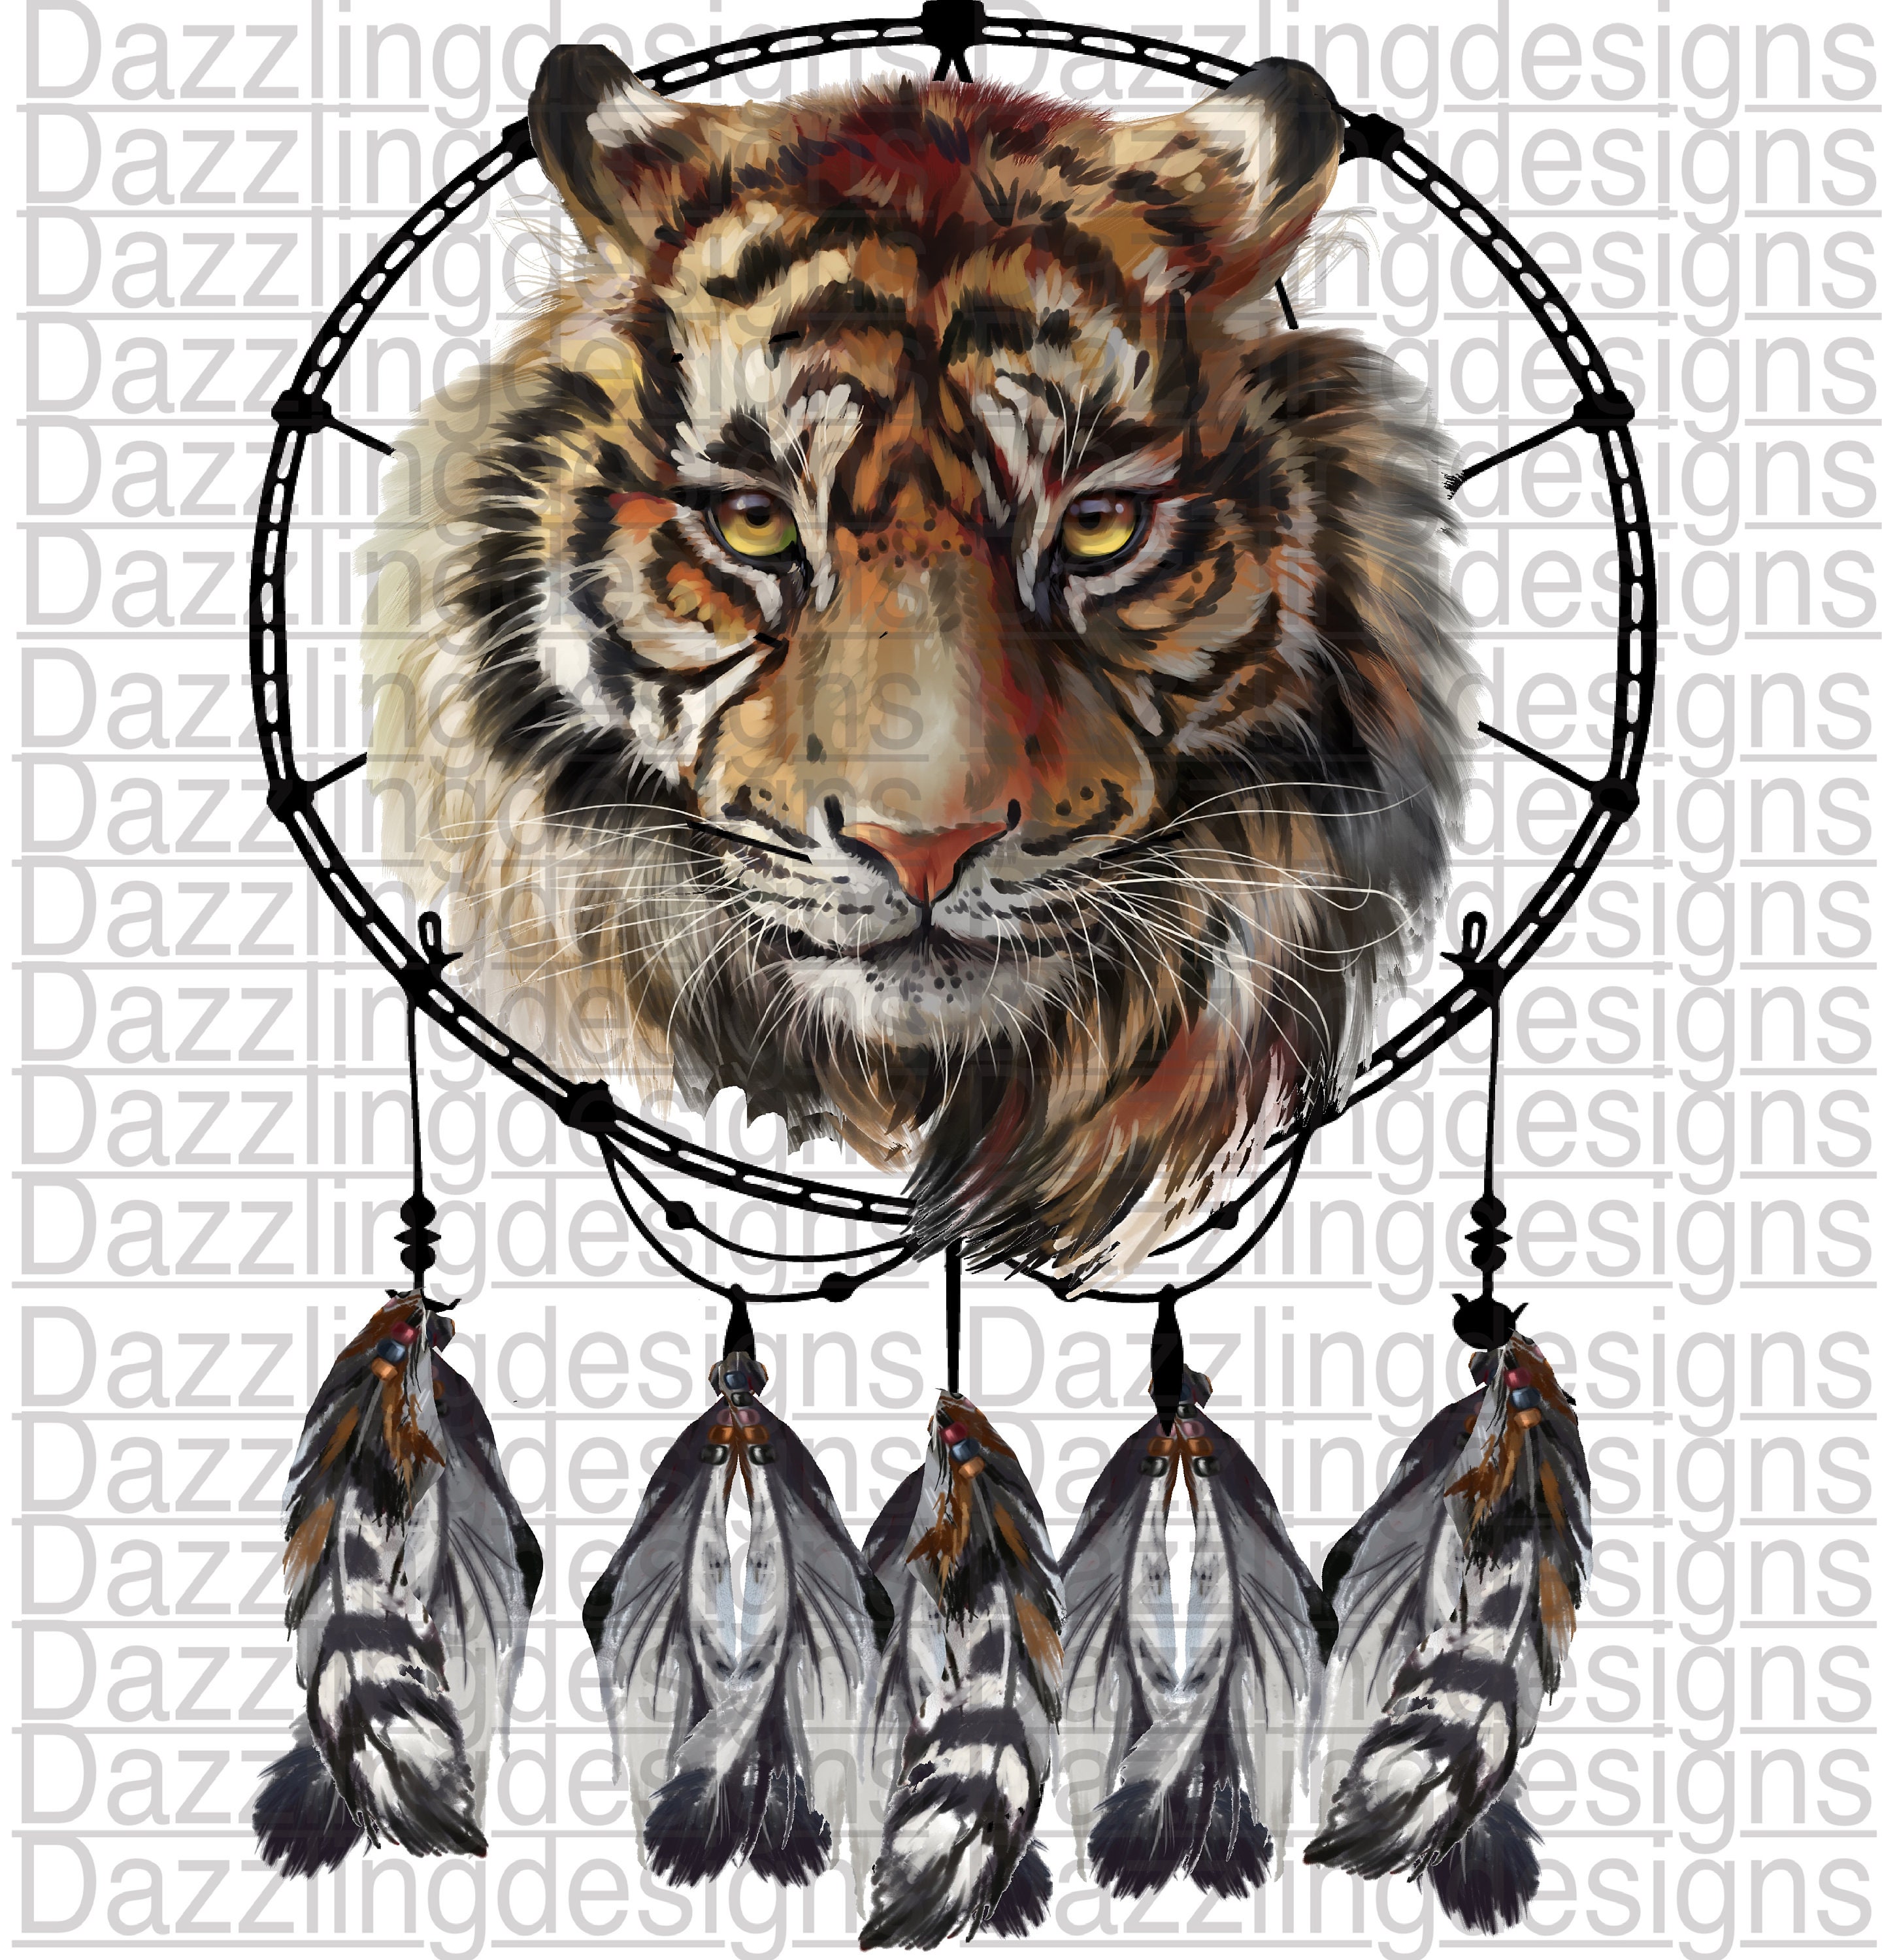 Call of the Wild Tiger Dream Catcher Etsy